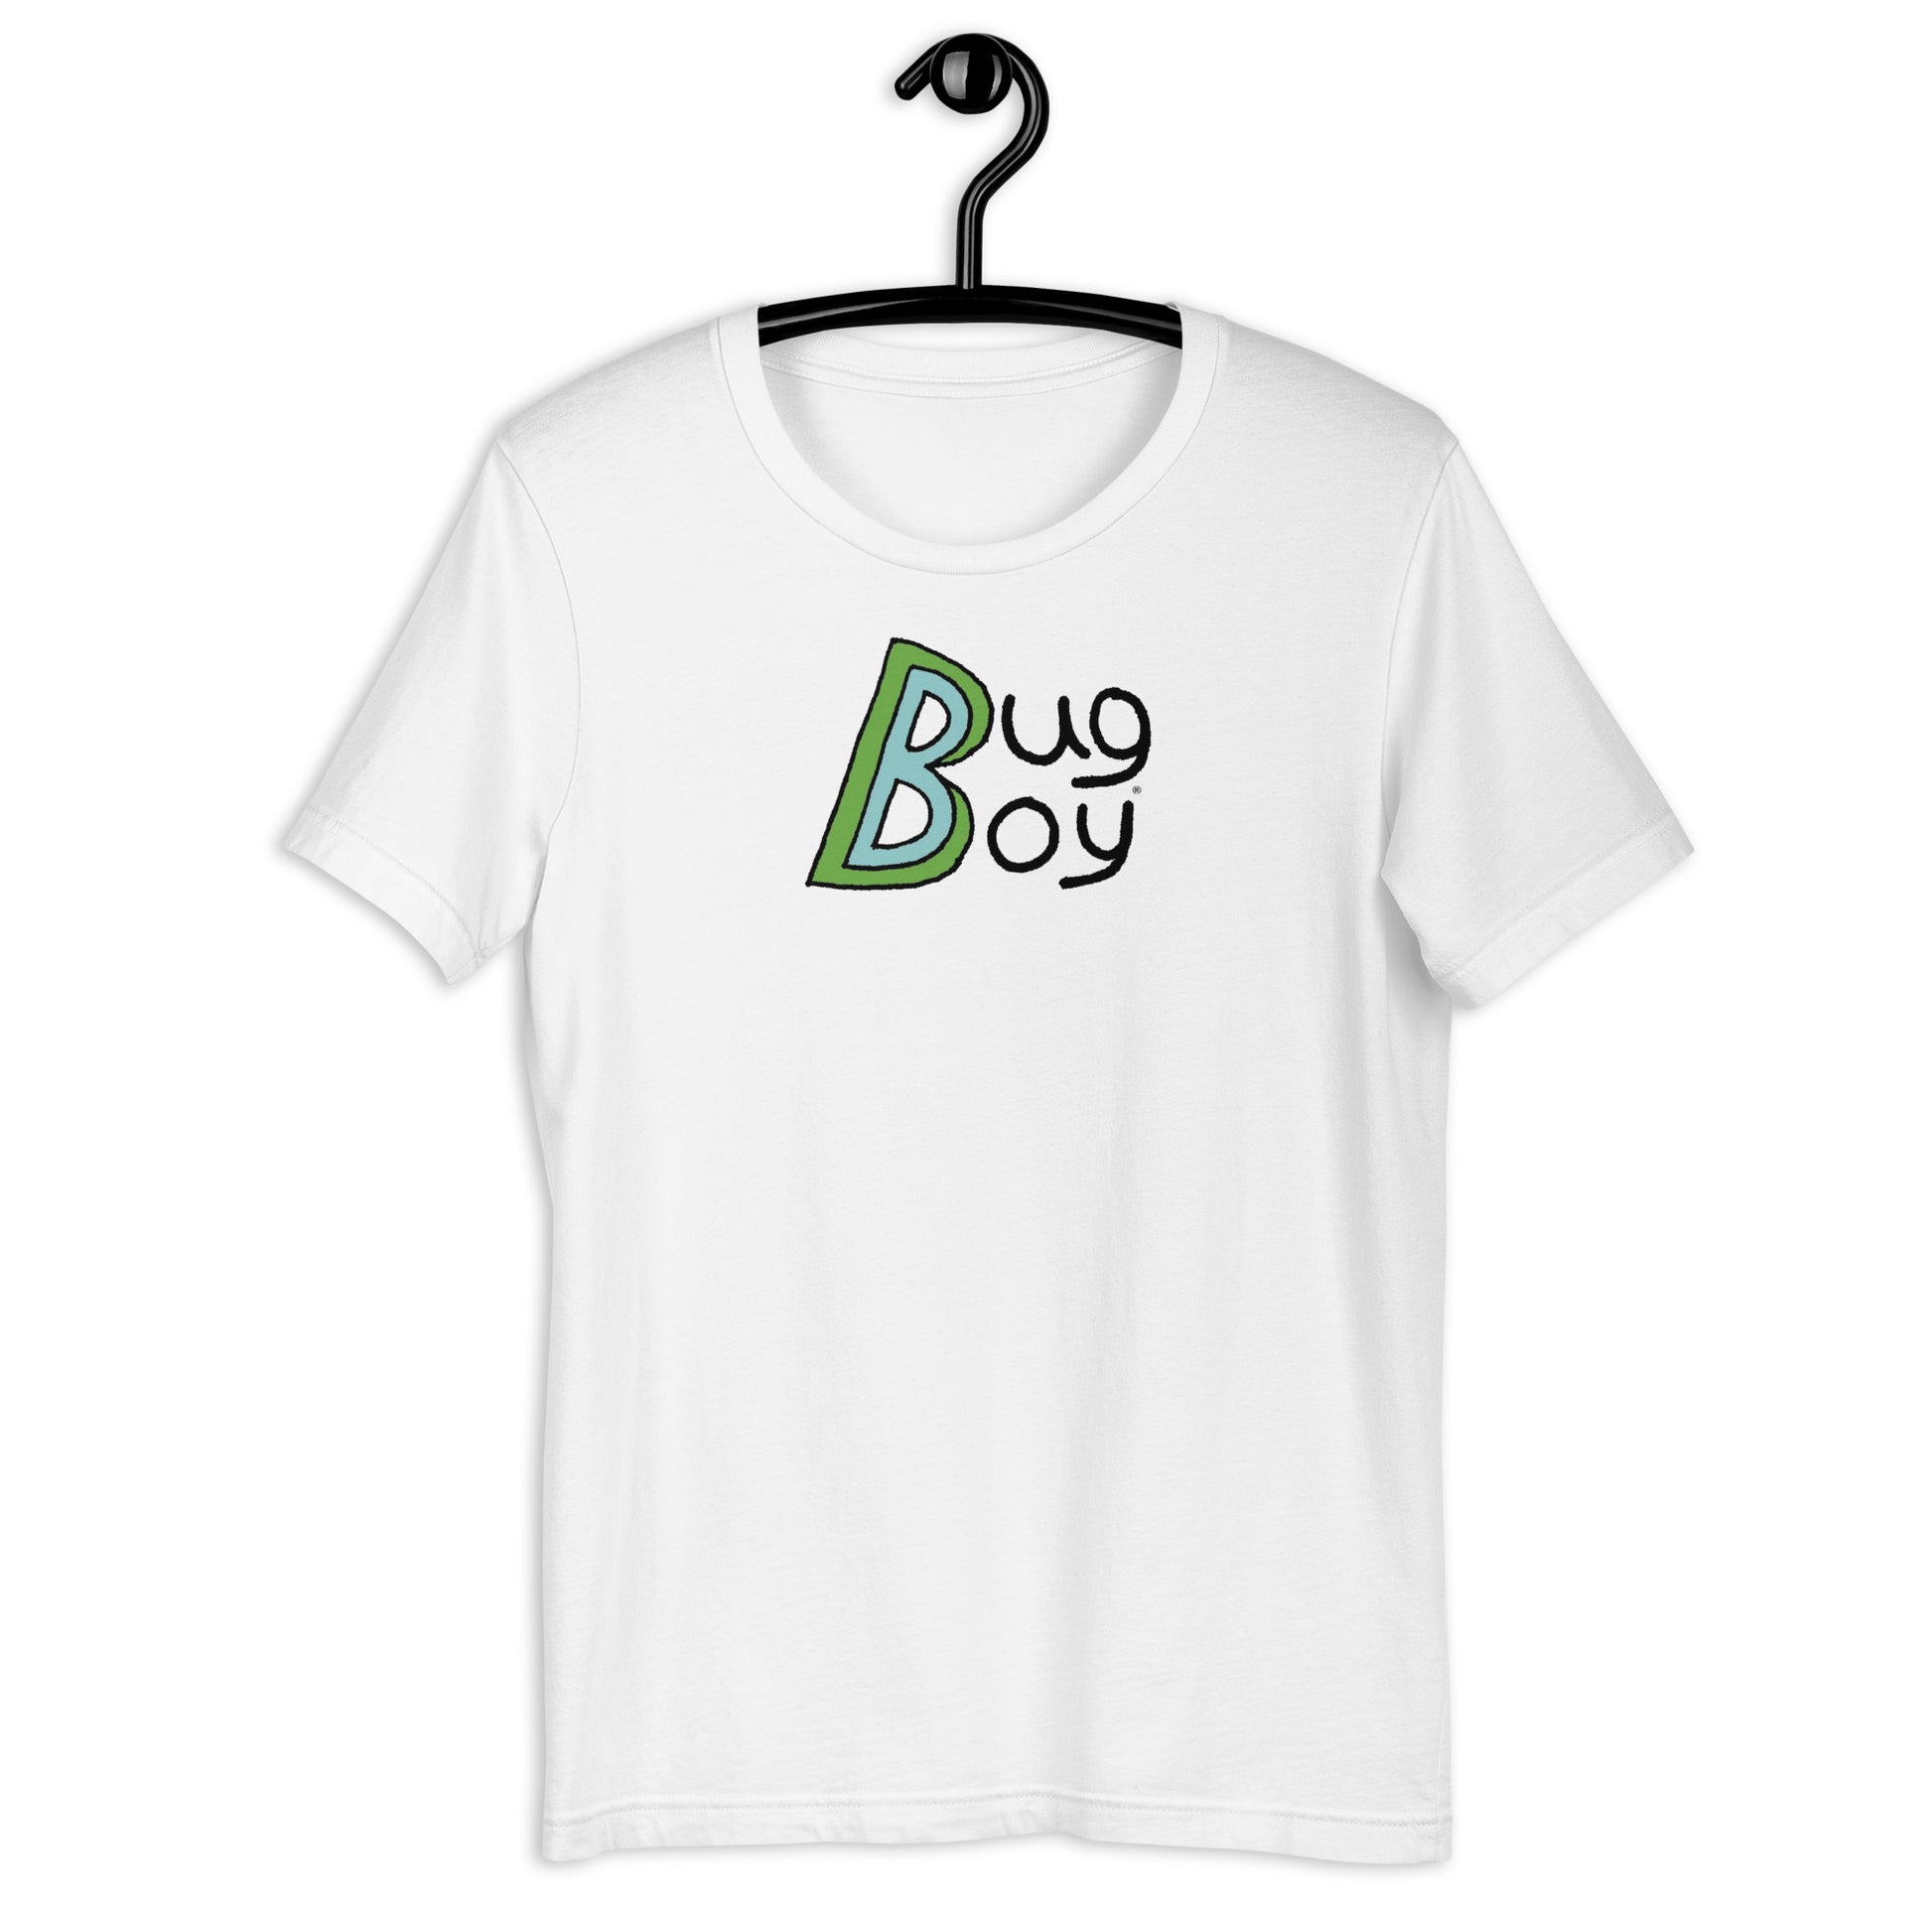 Bug Boy Logo T-Shirt in White - from The Bug Bungalow